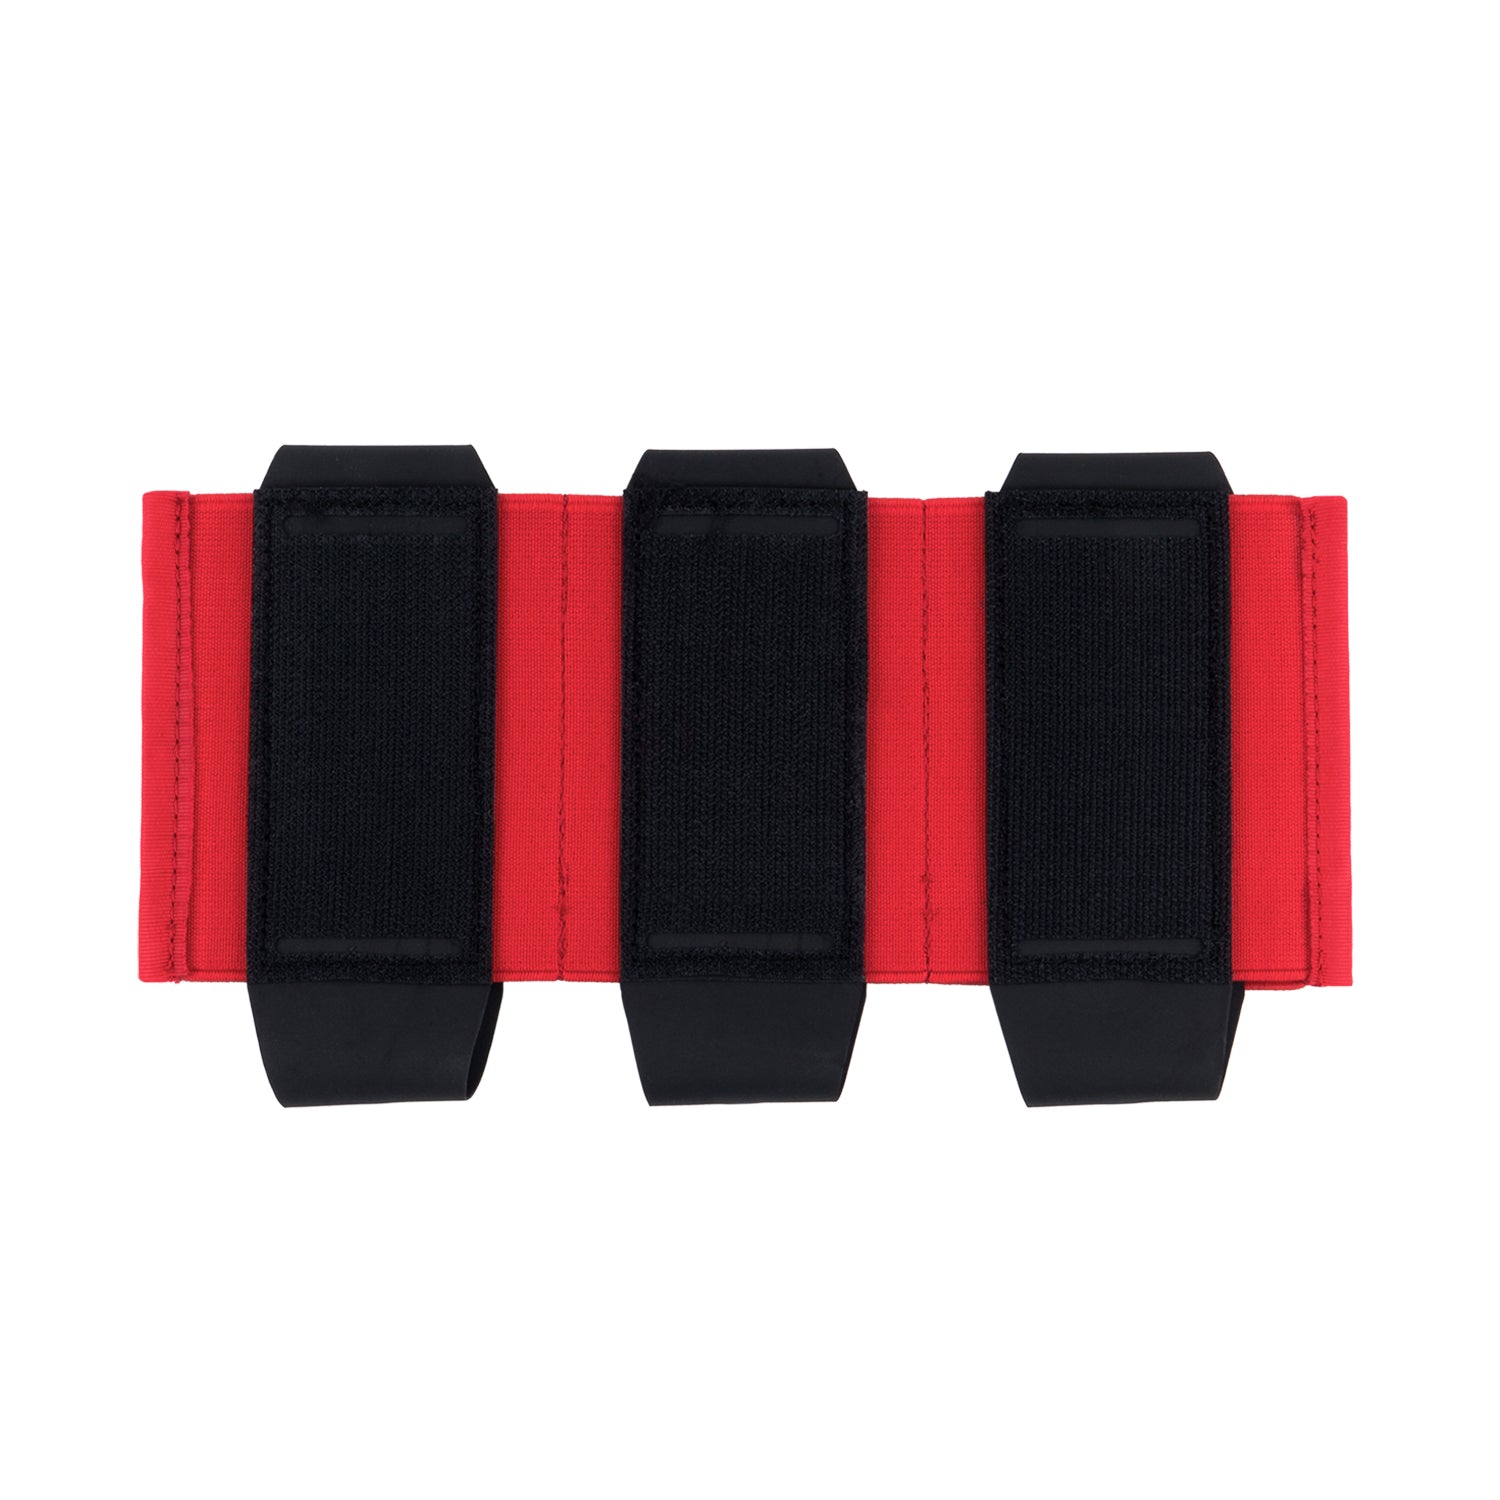 PROTON MAG POUCH INSERT - RIFLE [TRIPLE] - RED